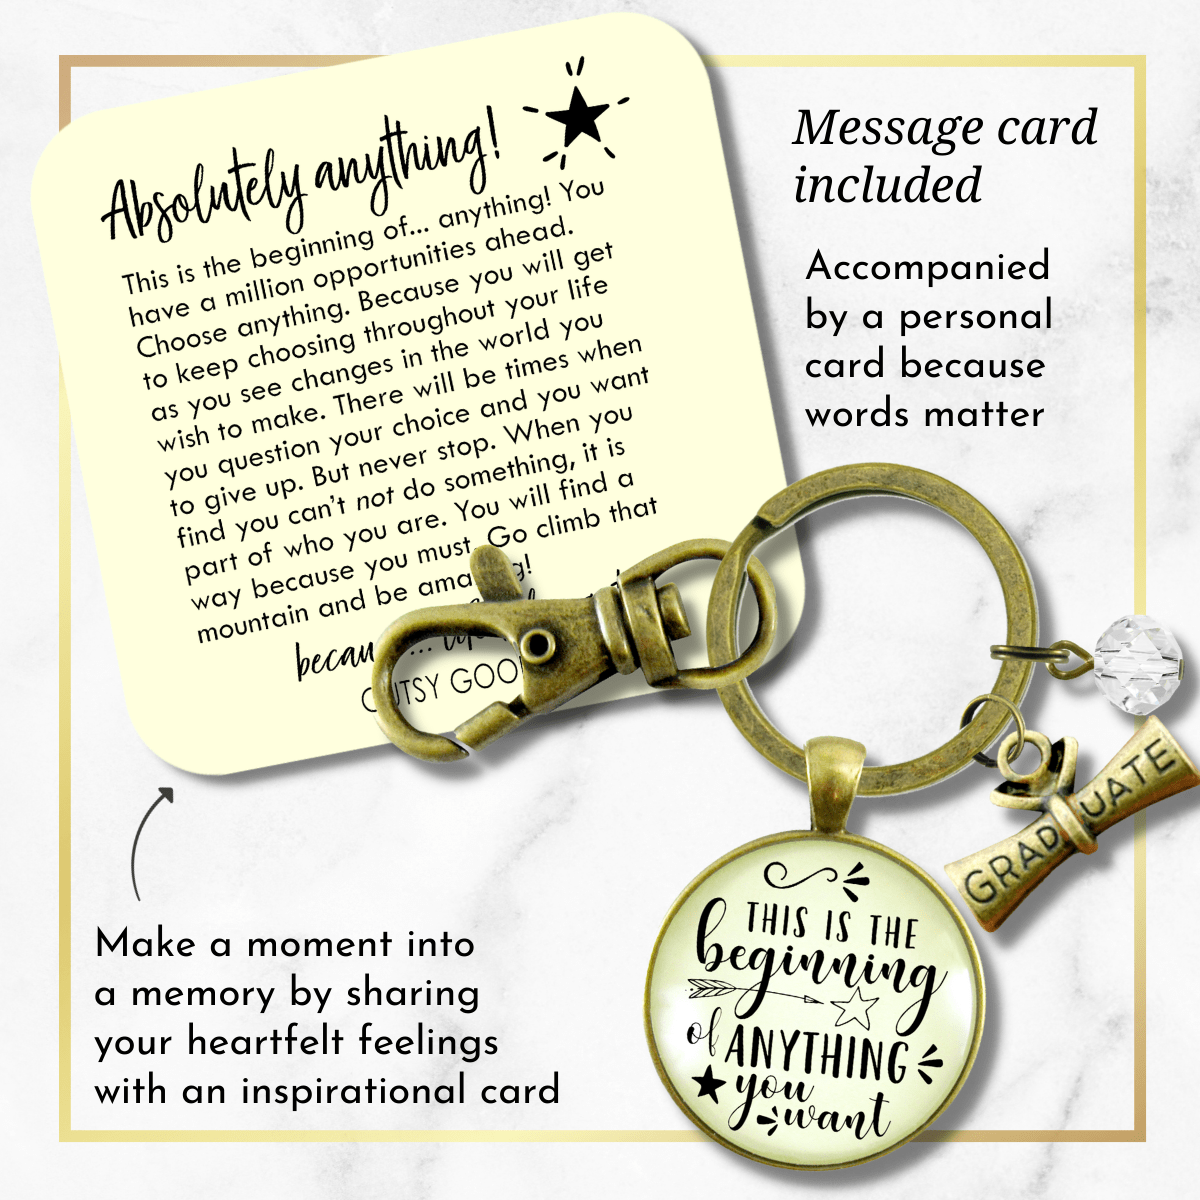 Inspirational Keychain This Is The Beginning Of Anything Life Mantra Star Jewelry Gift - Gutsy Goodness;Inspirational Keychain This Is The Beginning Of Anything Life Mantra Star Jewelry Gift - Gutsy Goodness Handmade Jewelry Gifts